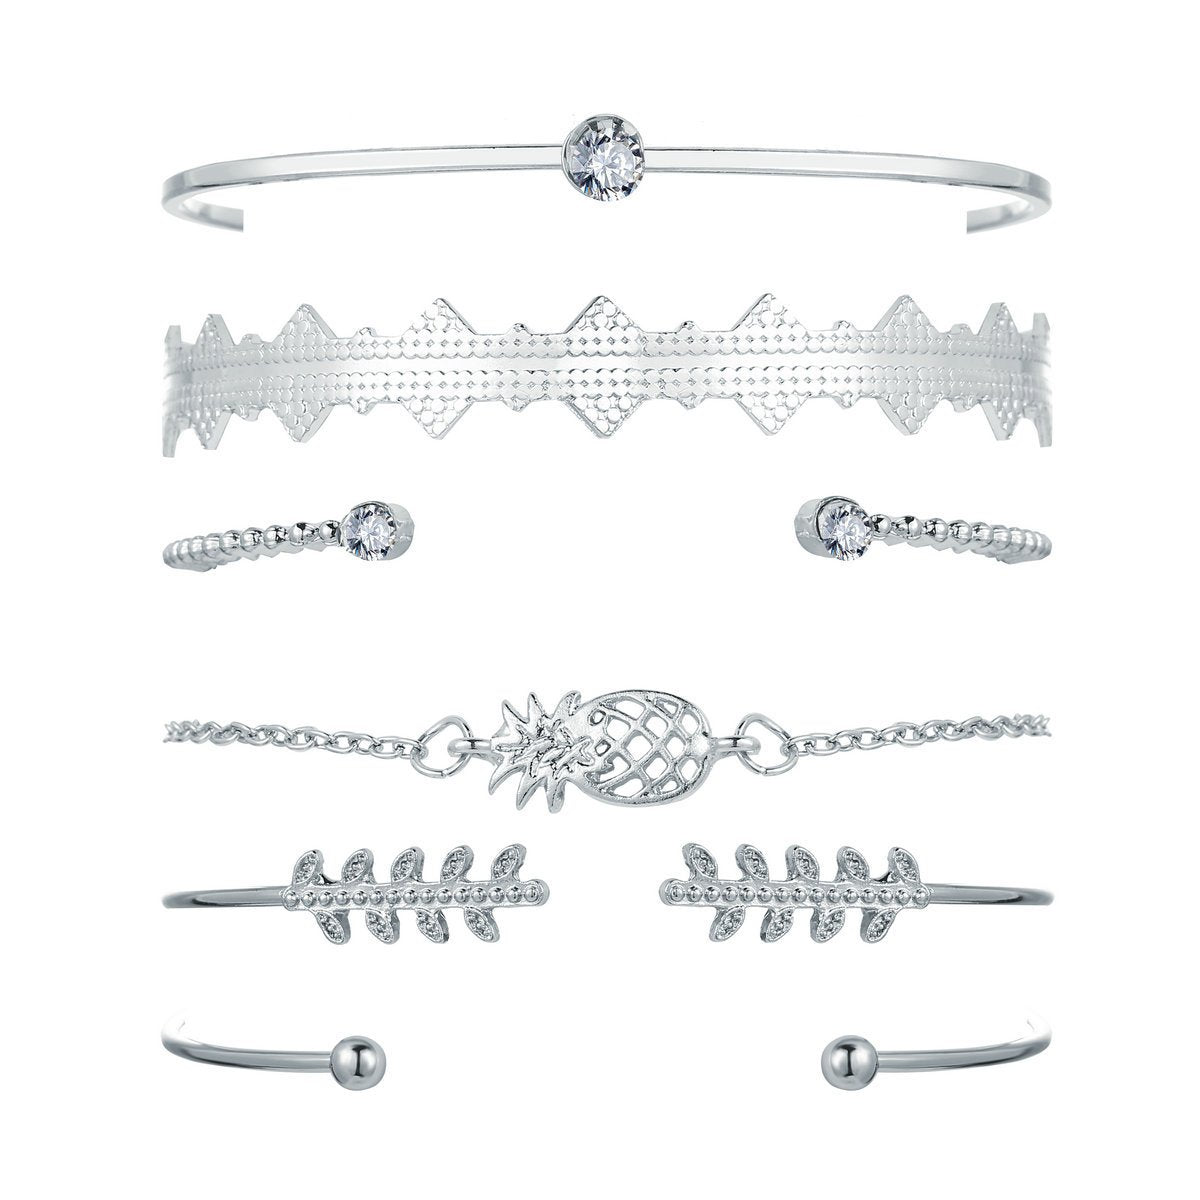 6 Piece Geometric Bangle Set With Austrian  Crystals 18K White Gold Plated Bracelet ITALY Made